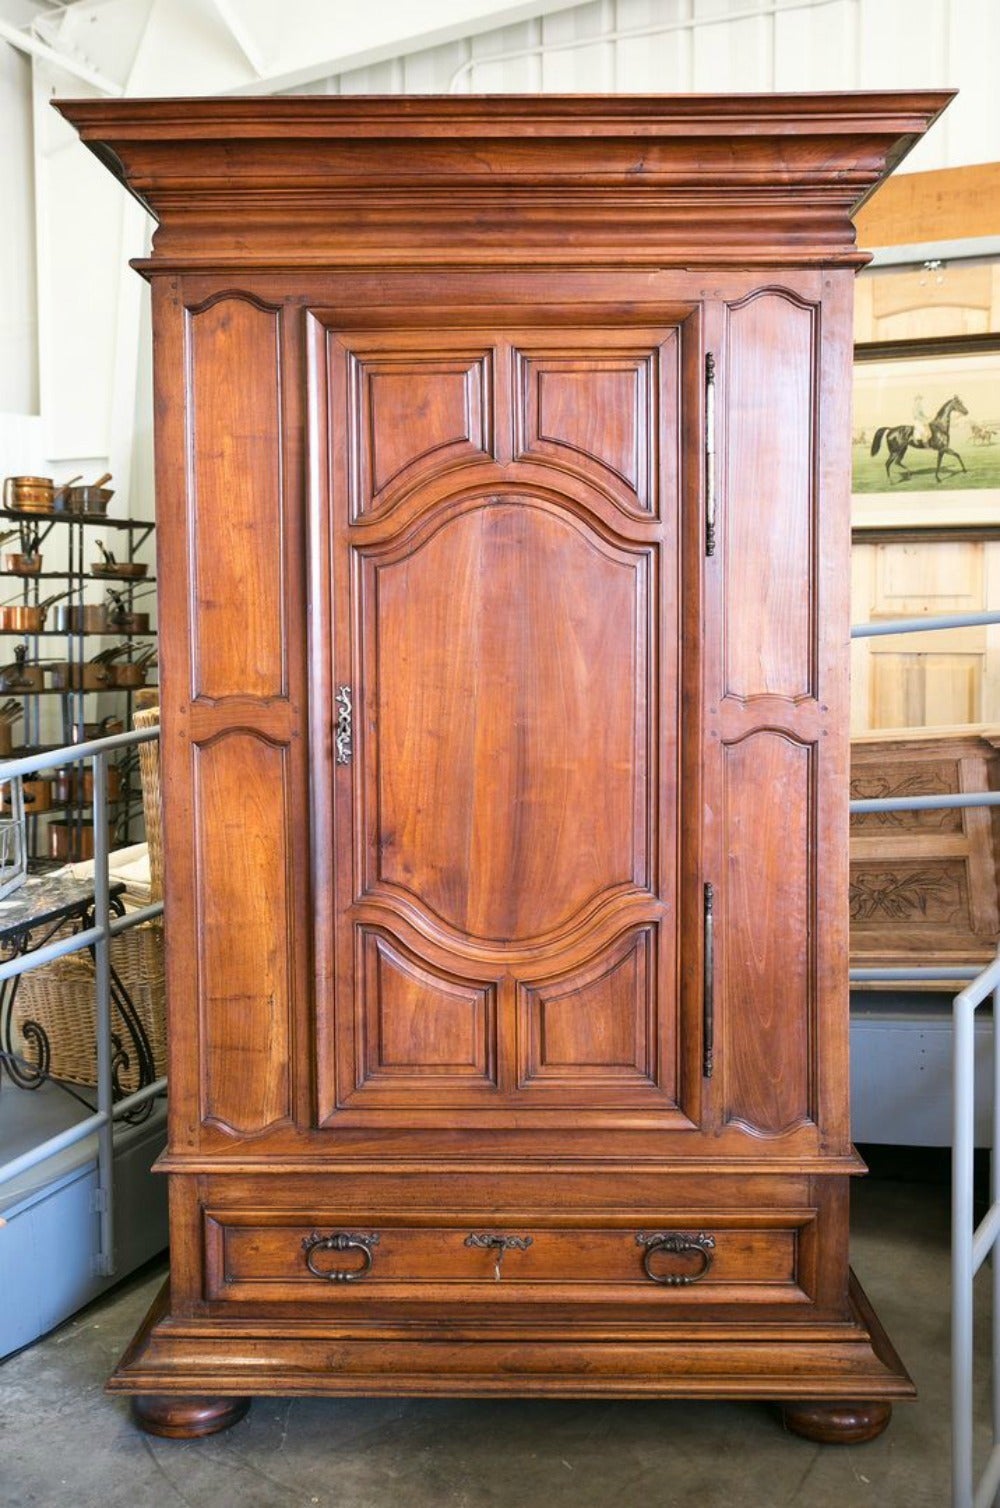 Rare and difficult to find Louis XIV period chateau bonnetiere. Solid walnut. An exceptional example from the Lyon region of France, renown in the 1700s for its superior production of armoires. Typical of Louis XIV ornamentation, the upper cabinet